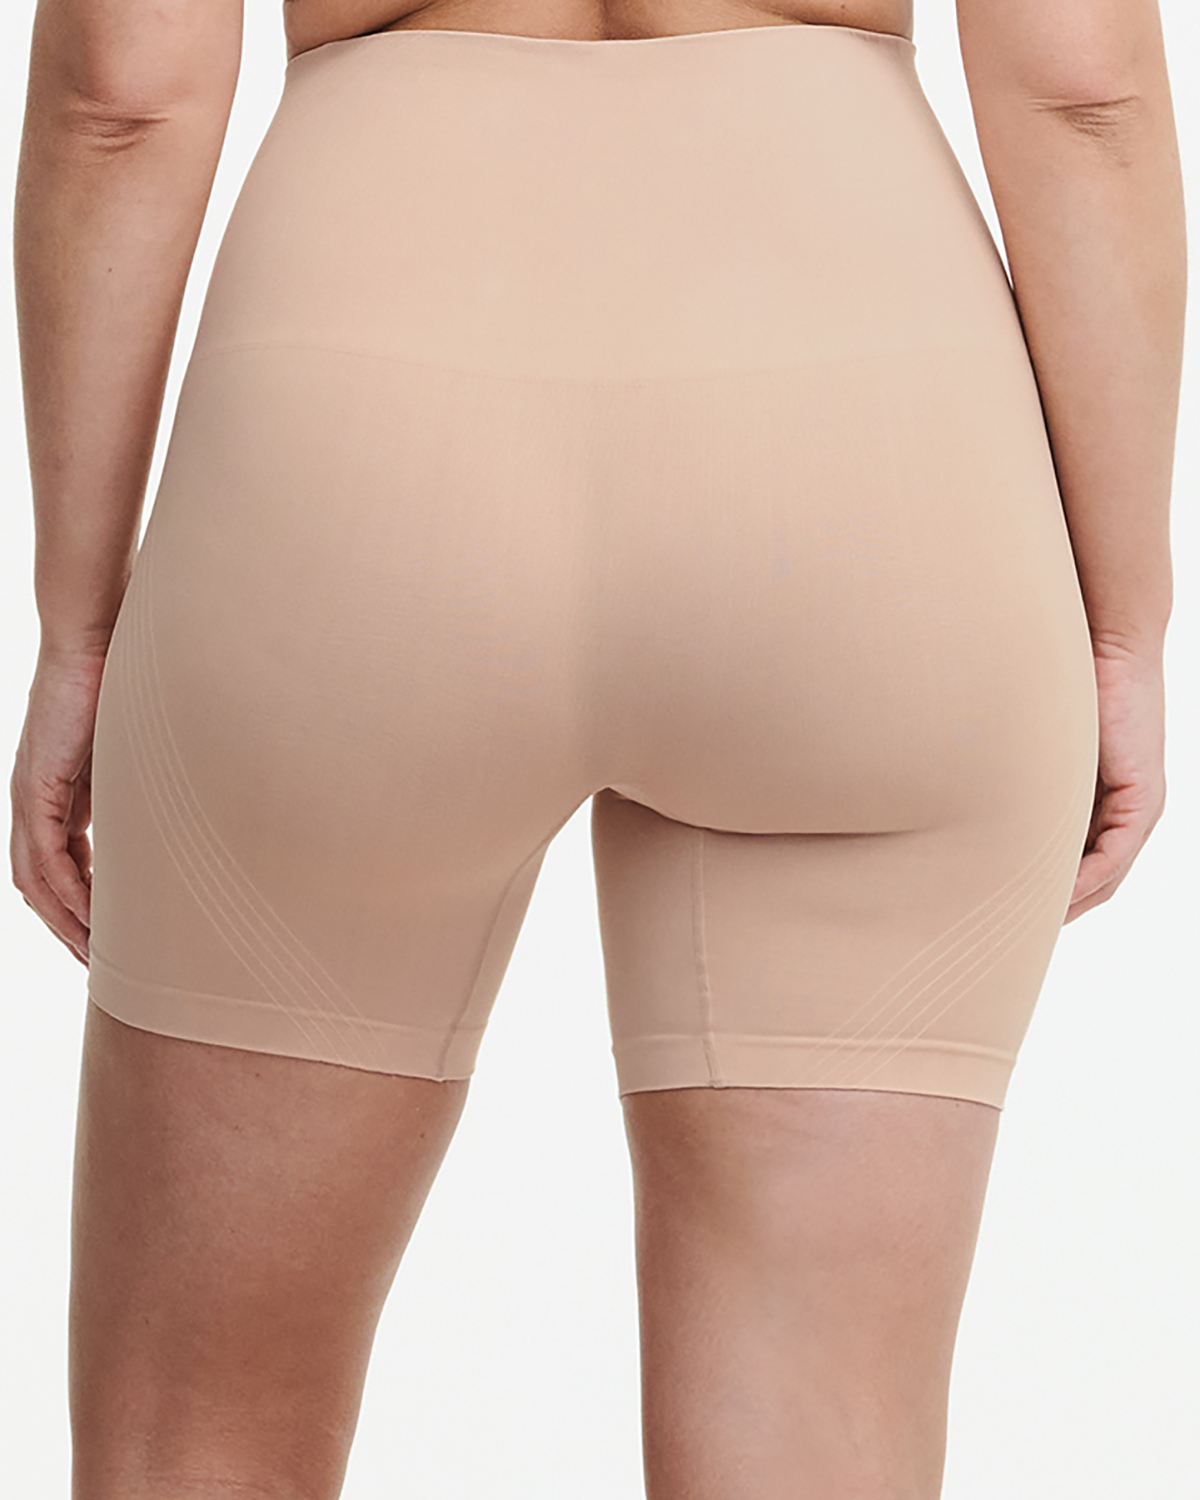 Model wearing a high waist mid thigh shaping short in beige